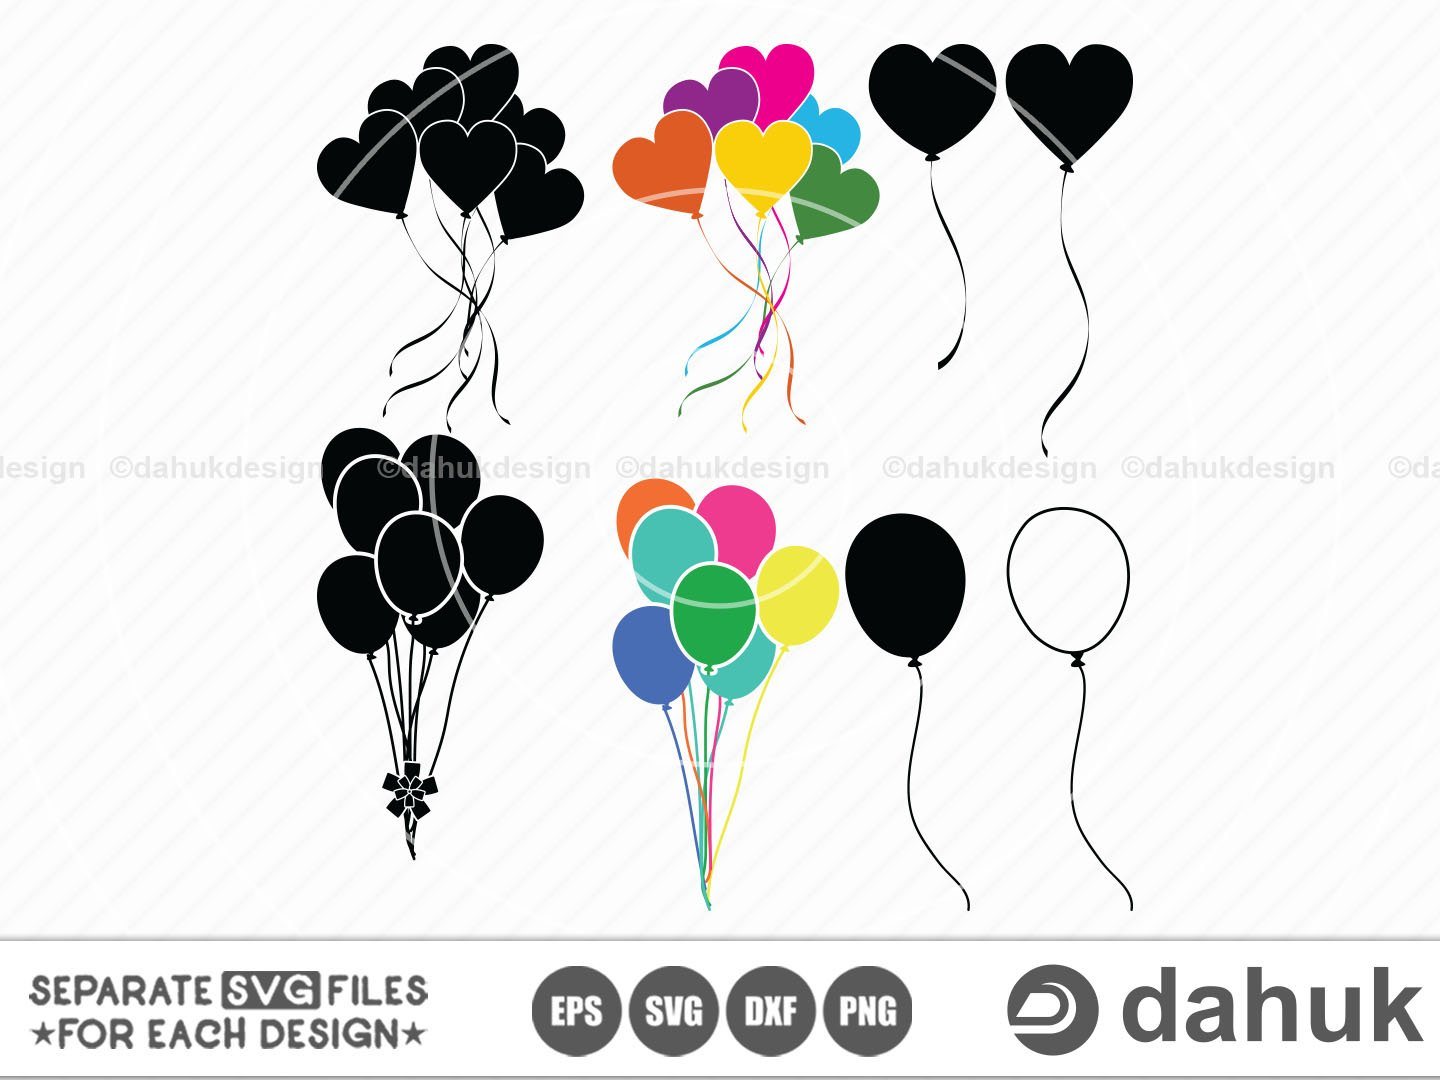 SVG > balloons string - Free SVG Image & Icon., Balloon Strings